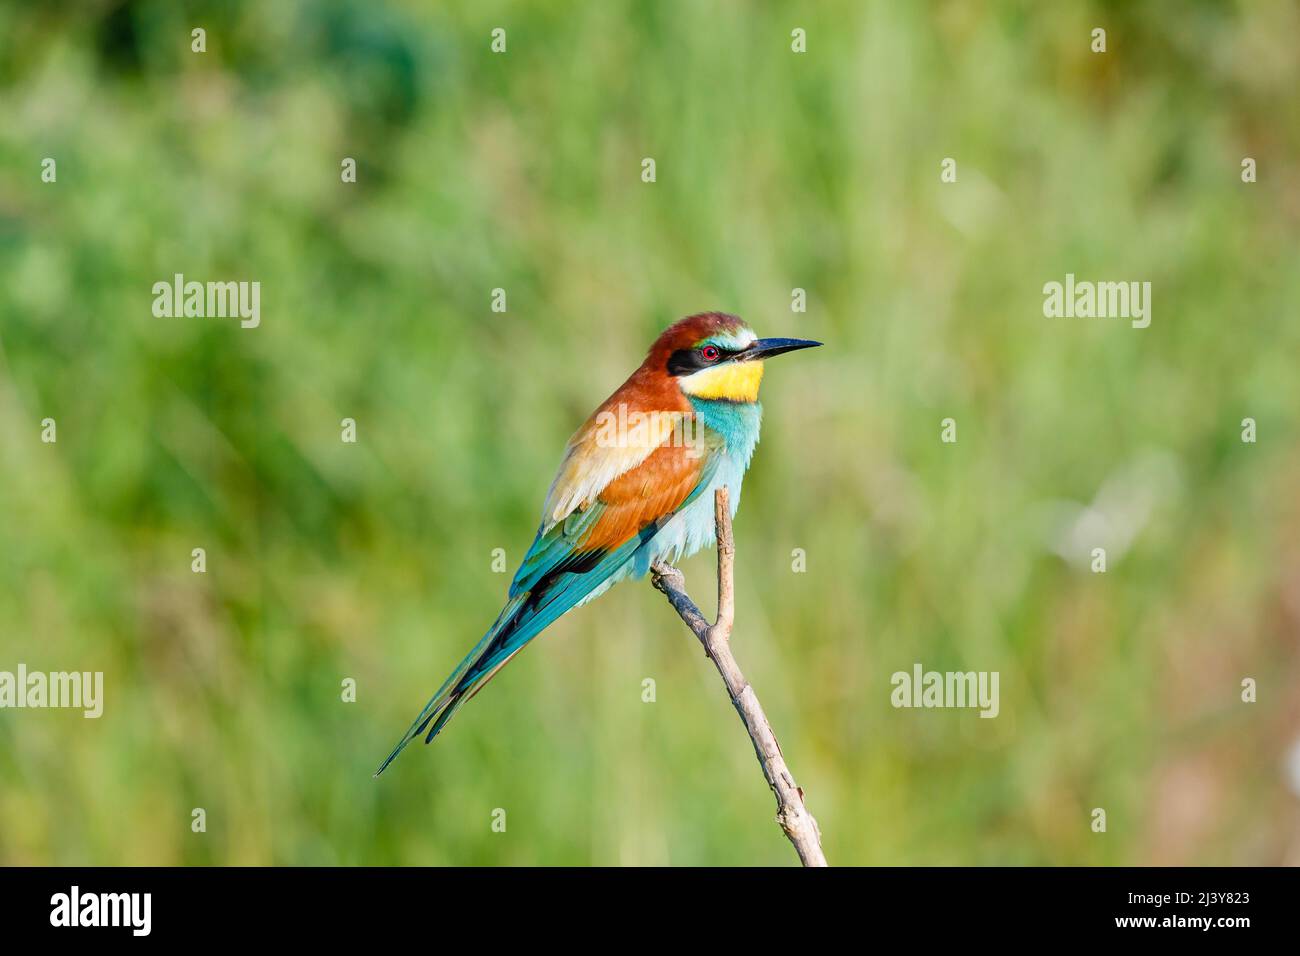 A European bee-eater (Merops apiaster) perching on a branch against a green background, Koros-Maros National Park, Bekes County, Hungary Stock Photo